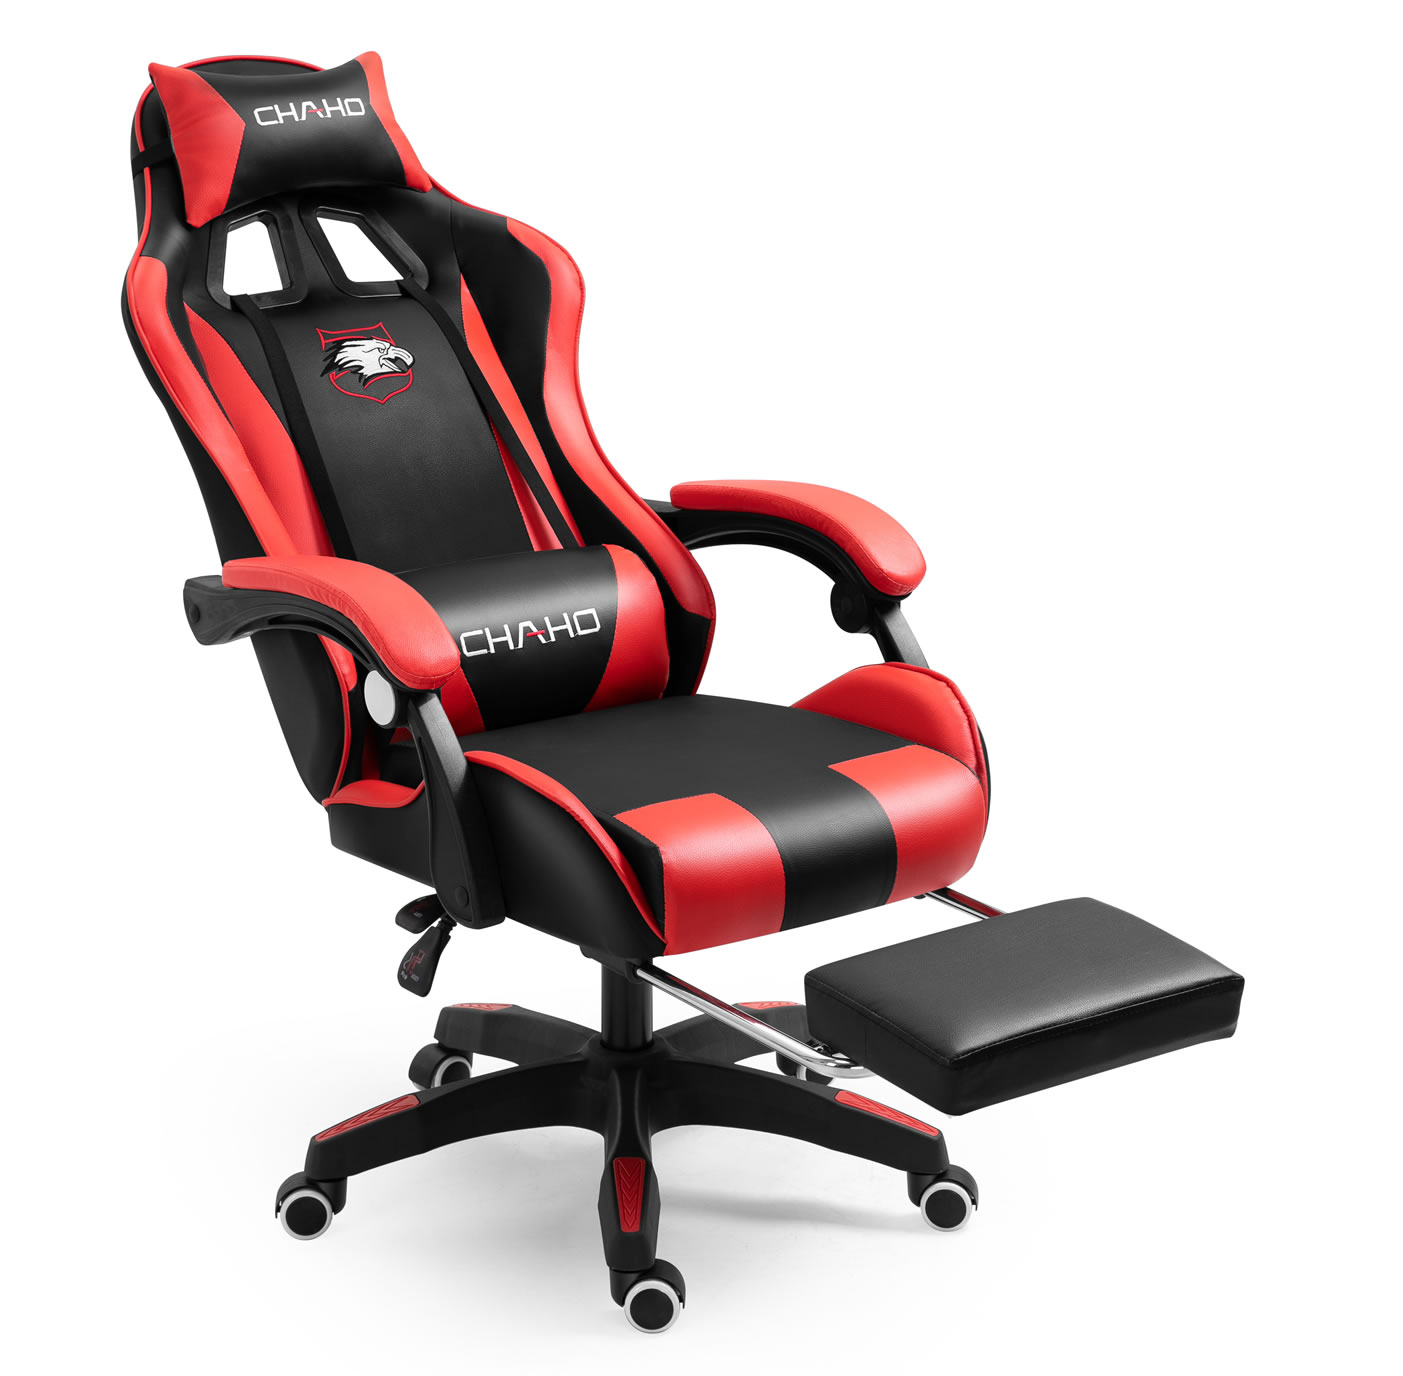 Home - Recliner Chair for Gaming With Footrest|Massage|Speakers